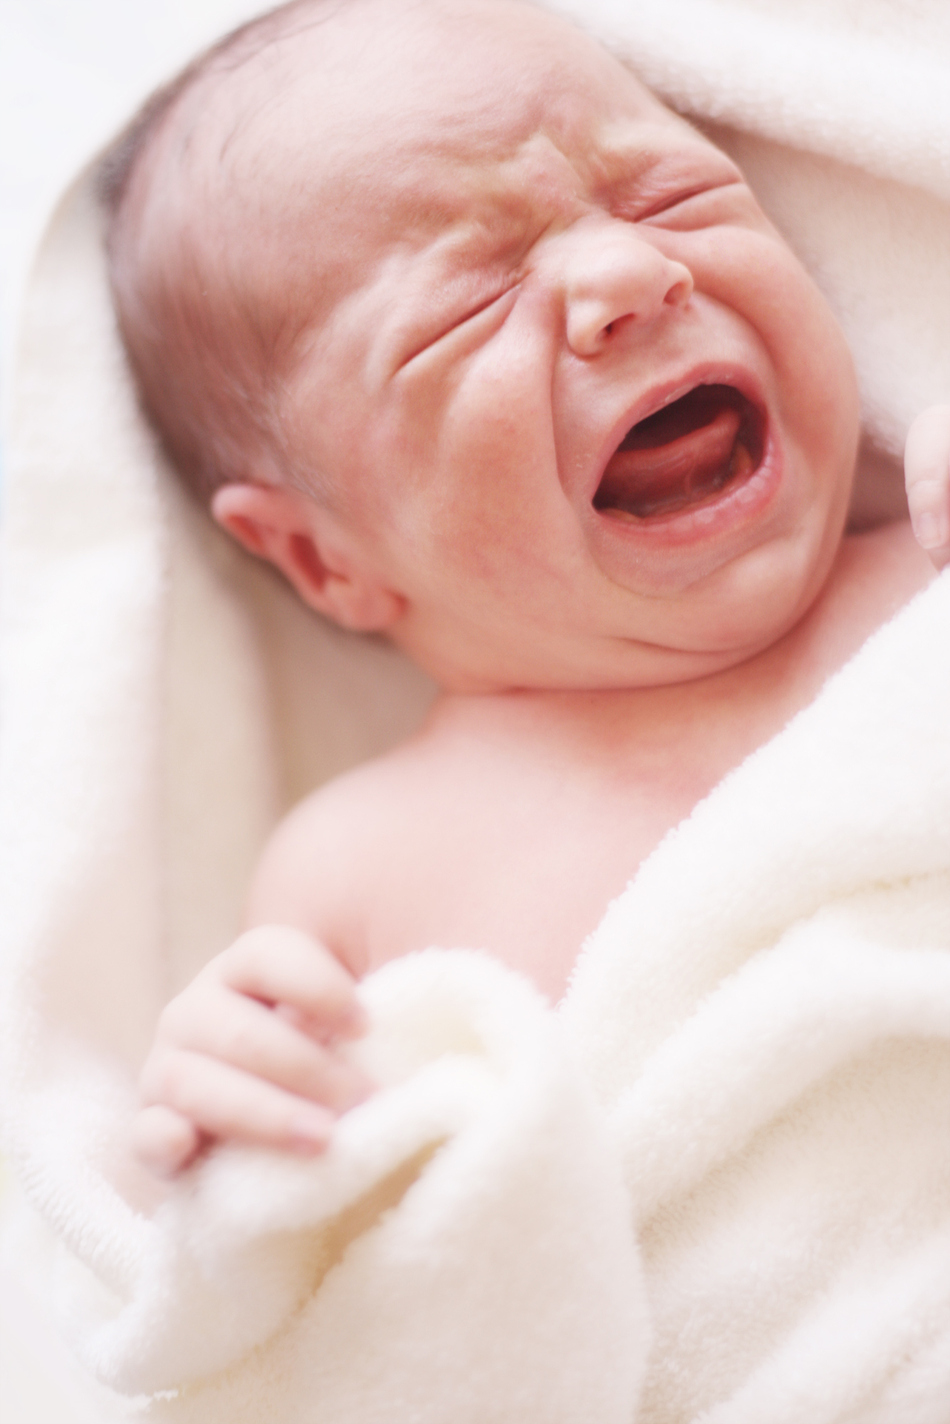 Debunking Old Wives' Tales: Troubleshooting Your Newborn